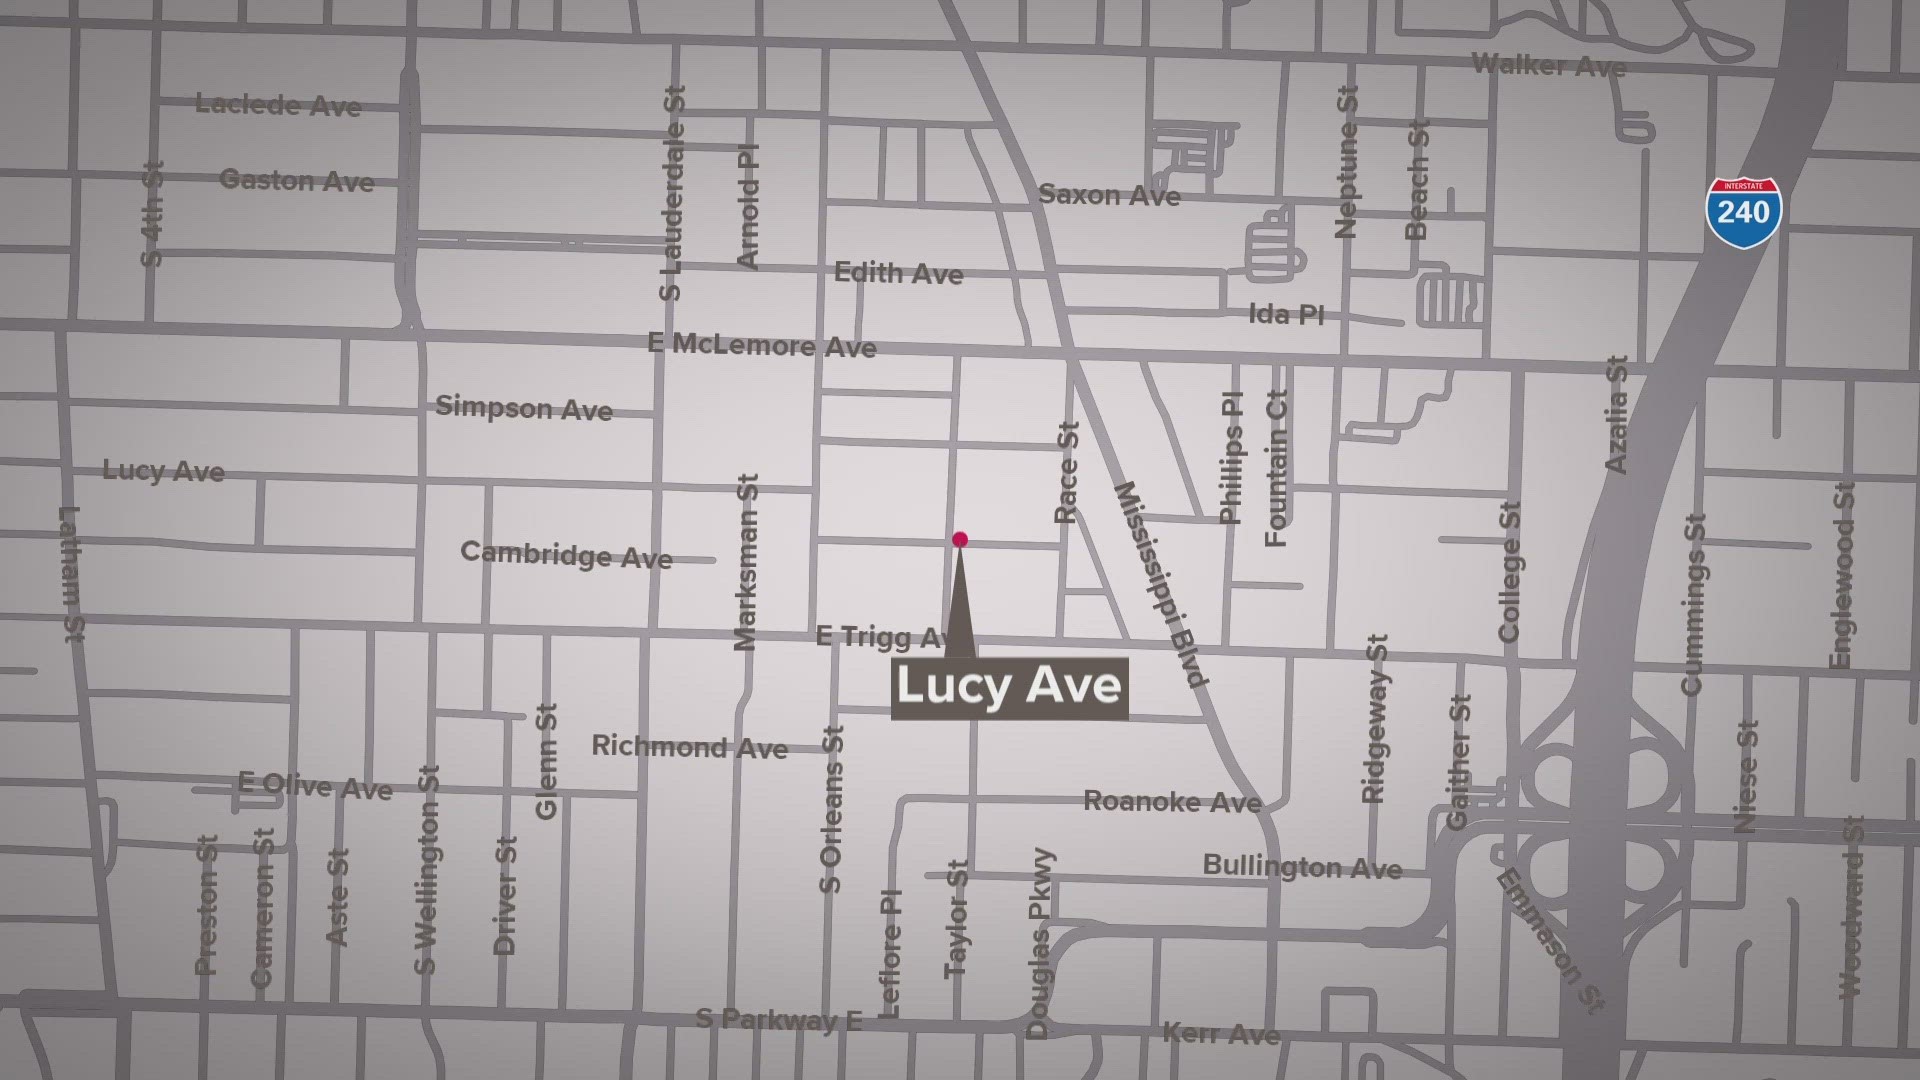 MPD officers responded to the shooting just after 7:30 a.m. Saturday in the 700 block of Lucy Ave., near Pond St.